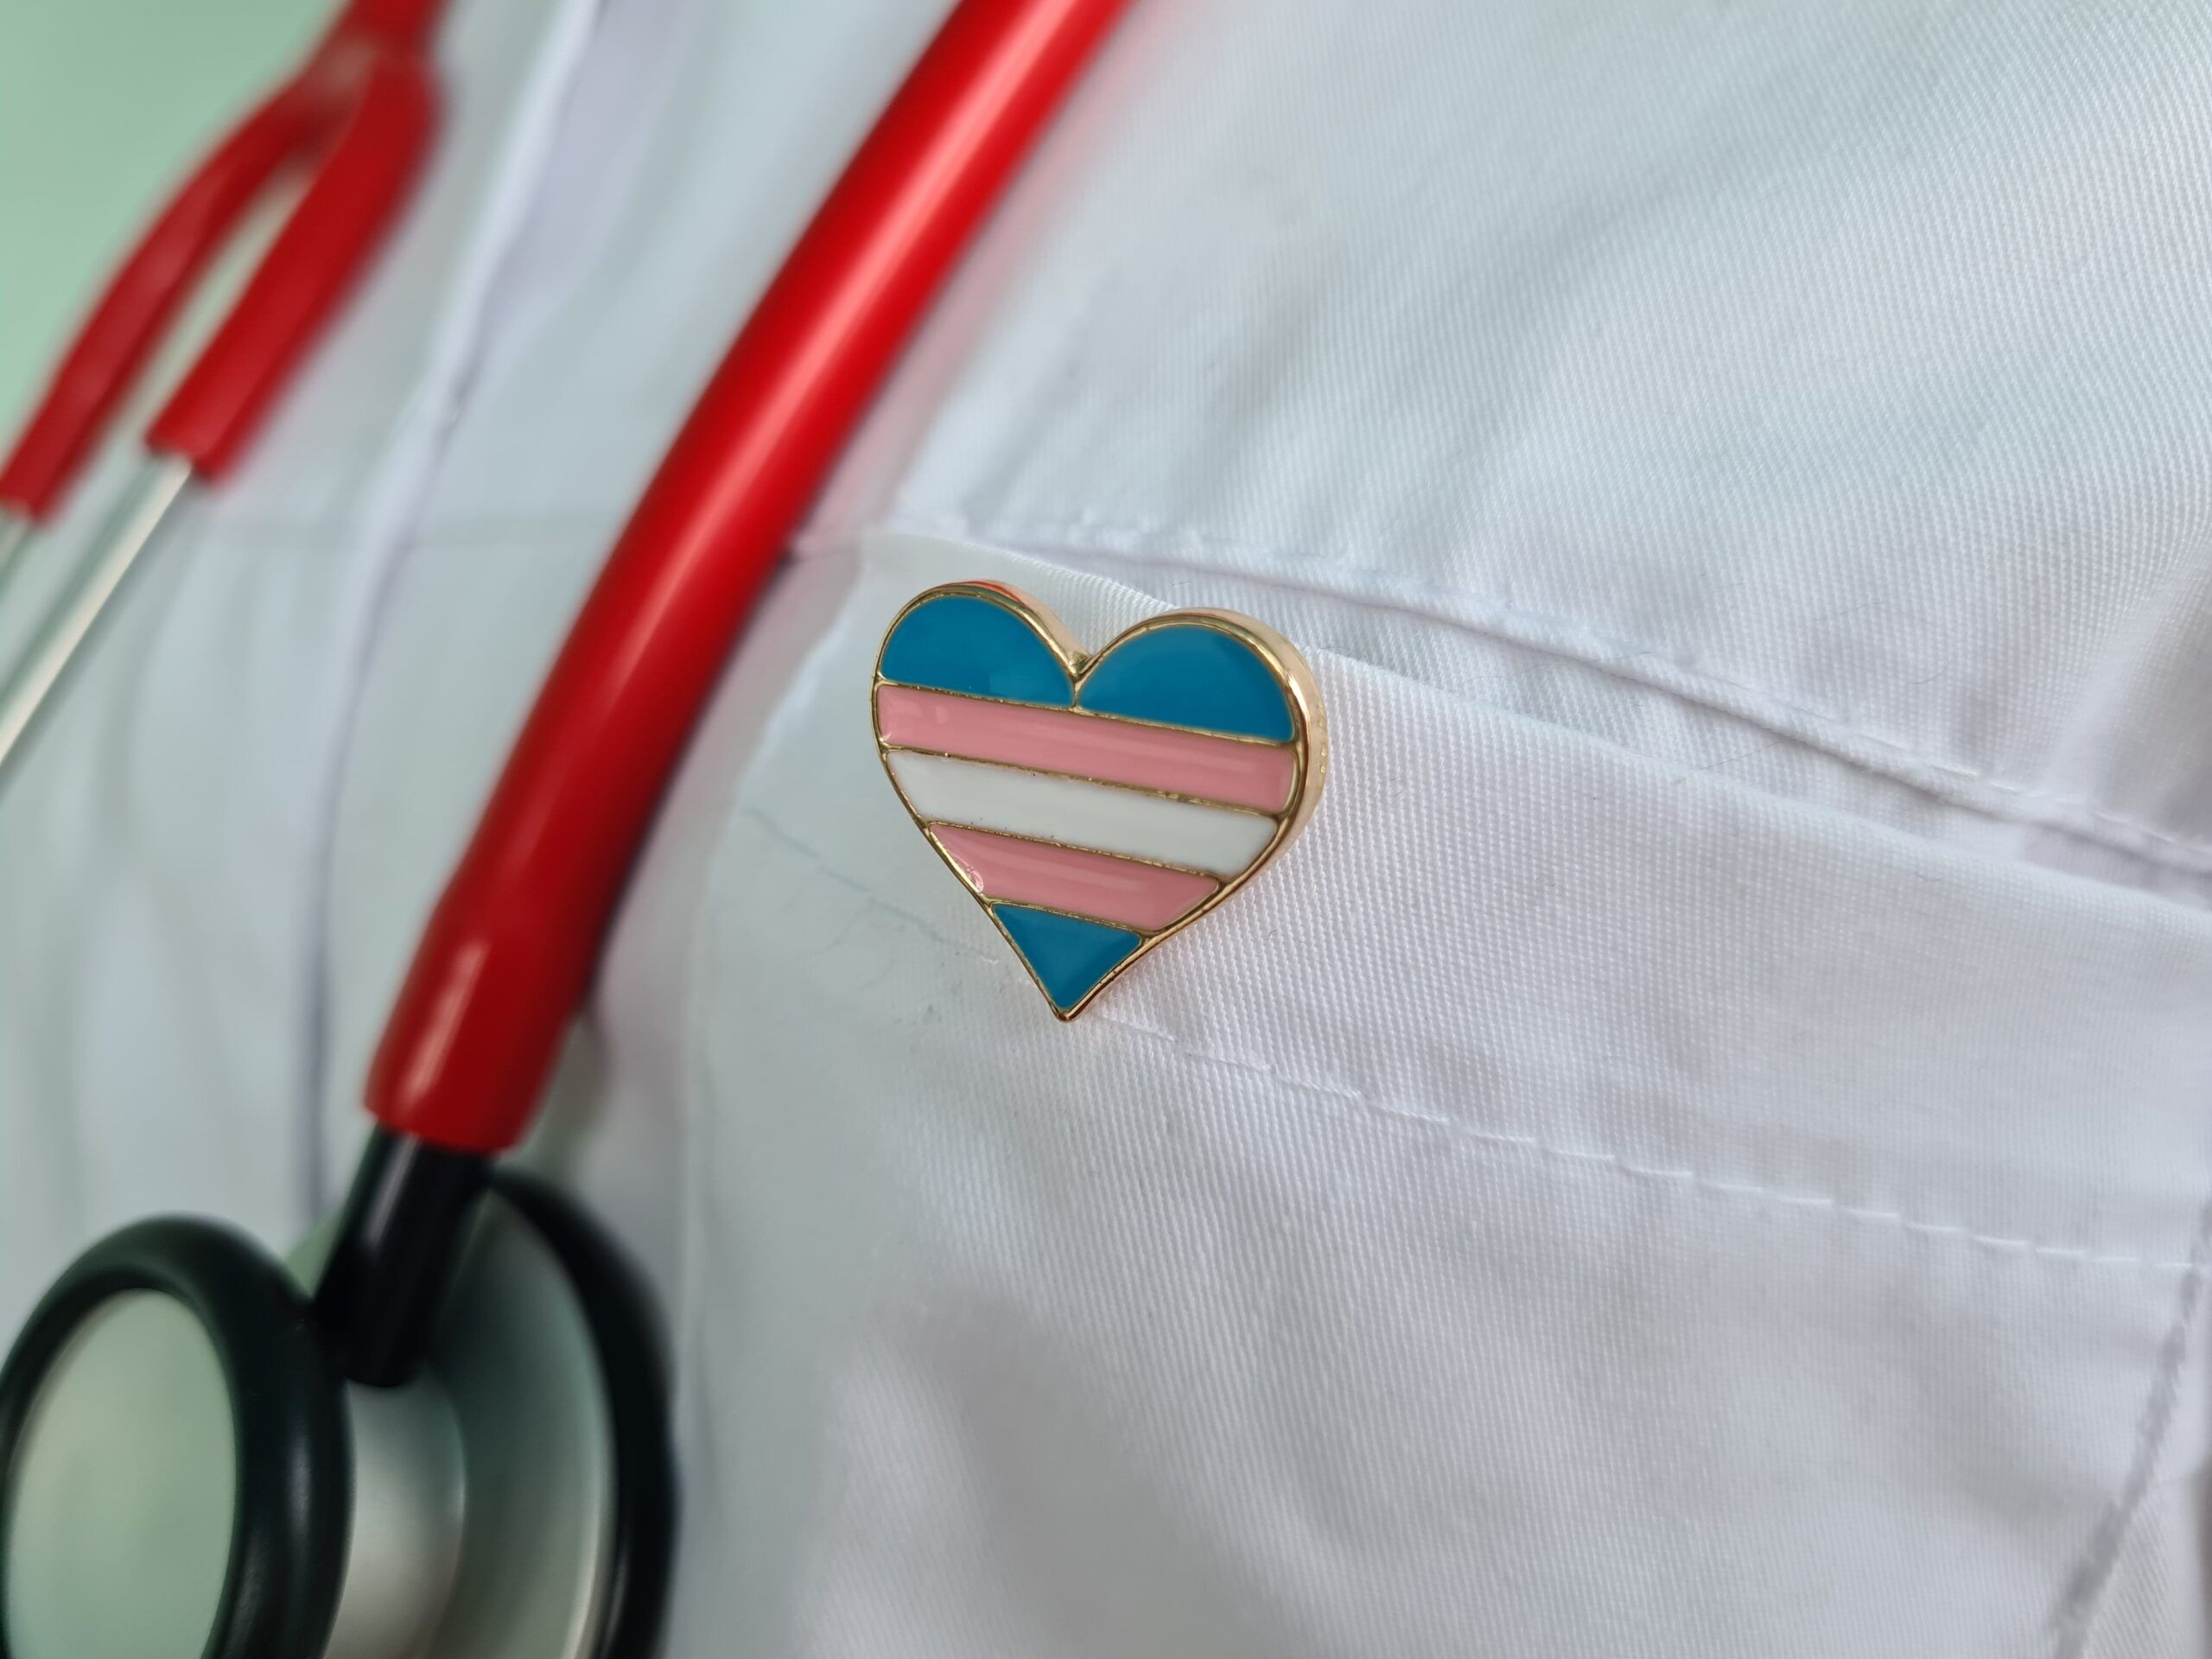 Close up of doctor lab coat wearing a stethoscope and heart-shaped trans flag pin